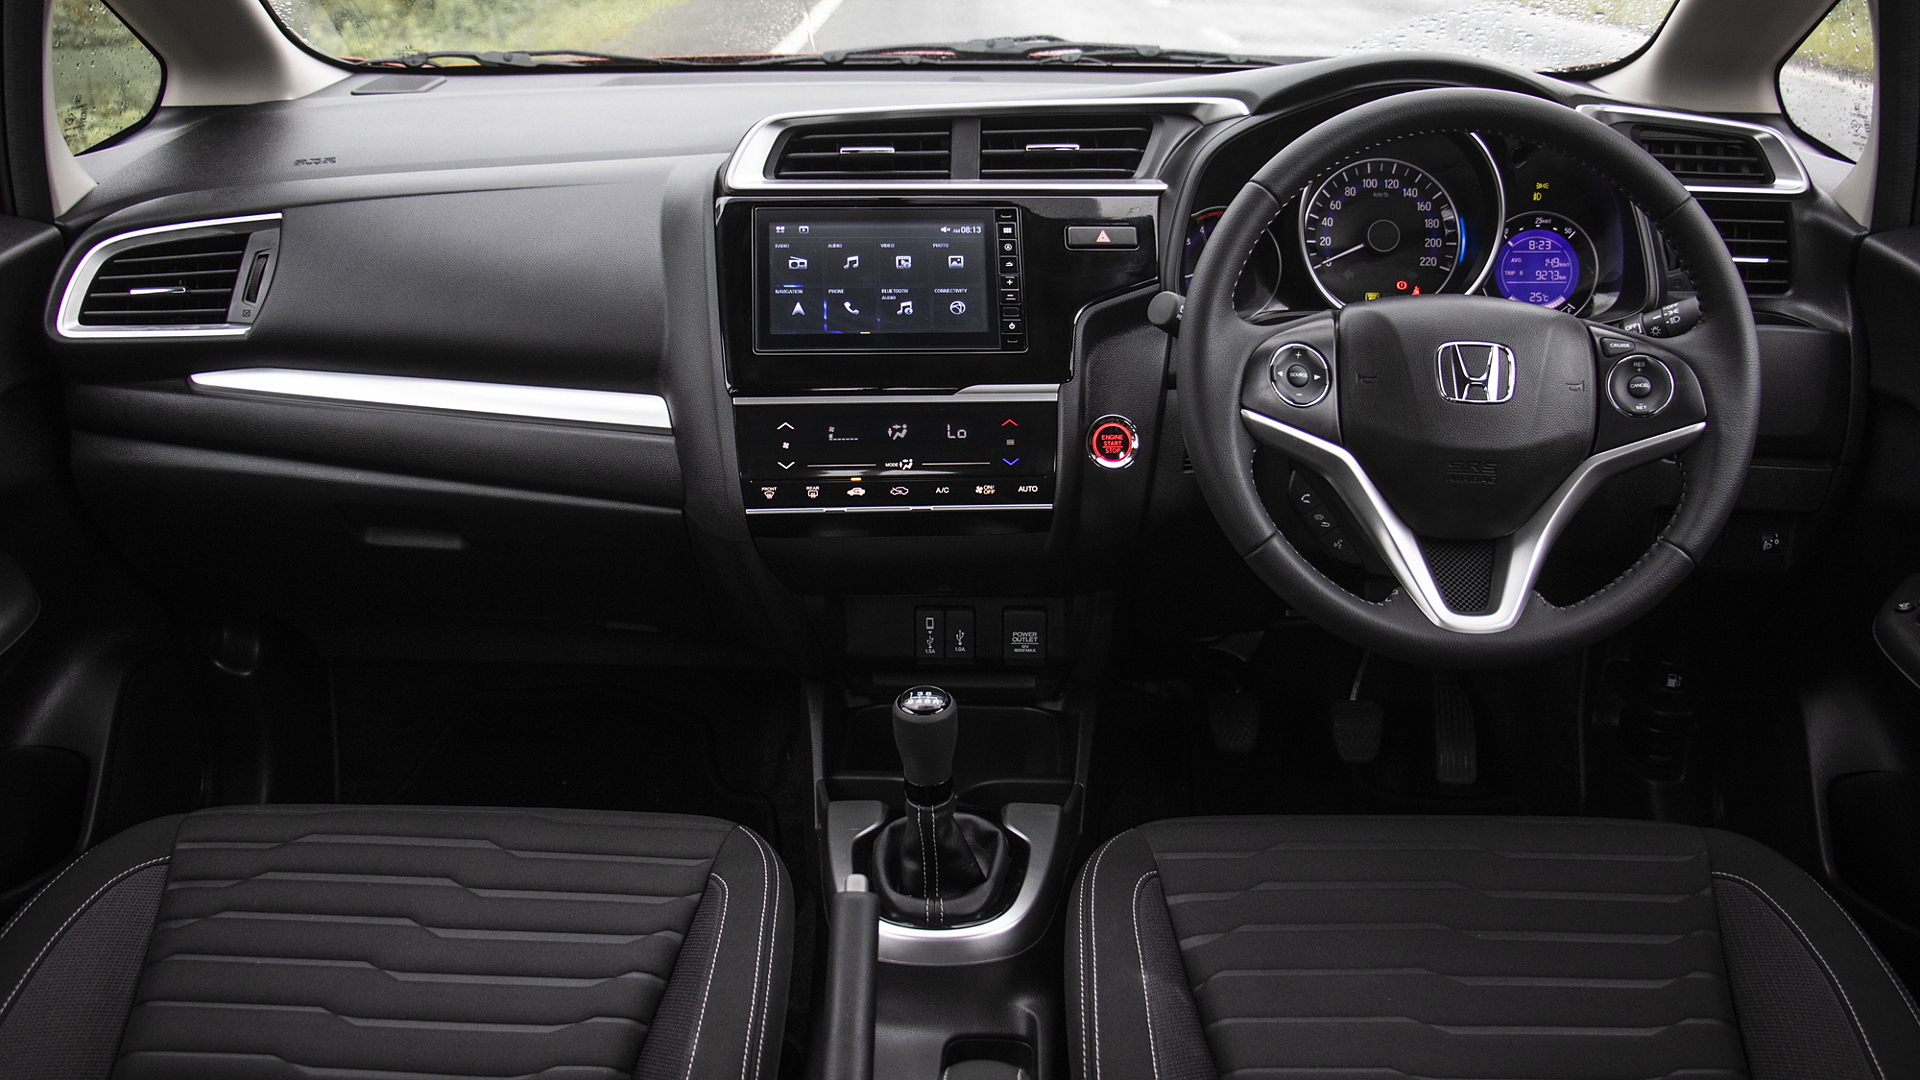 Honda Wr V Images Interior Exterior Photo Gallery 100 Images Carwale